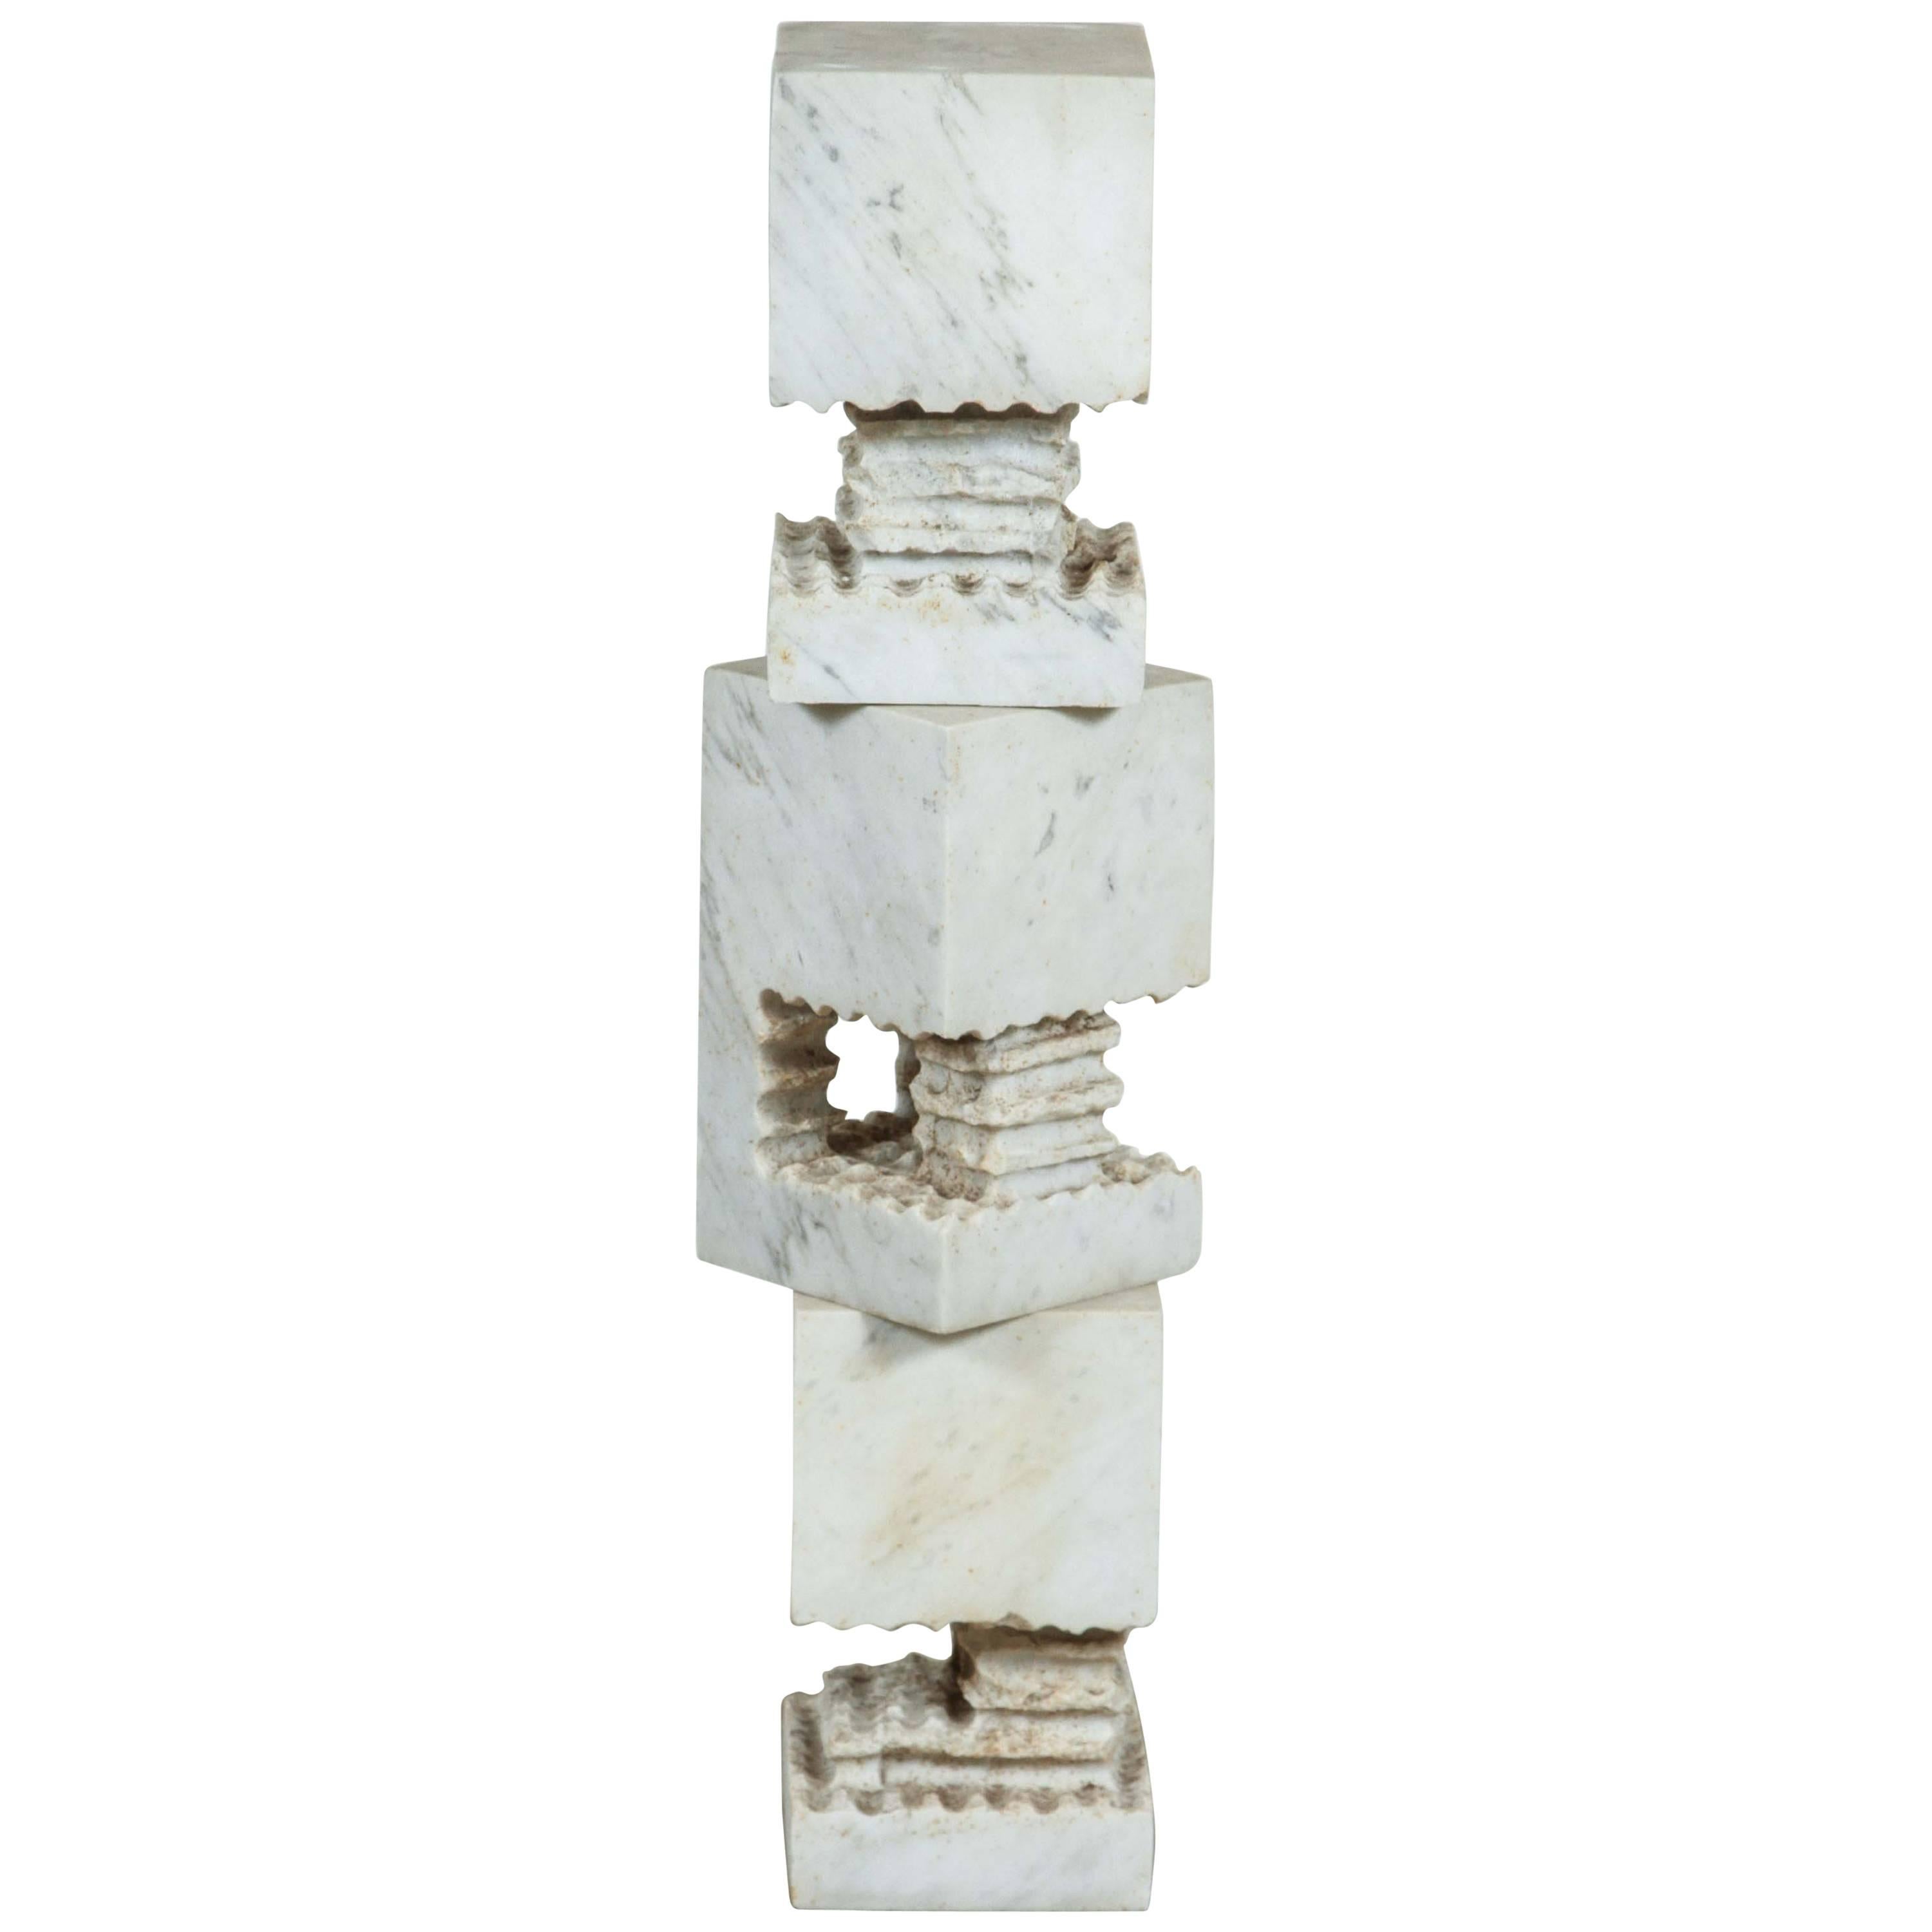 Set of Three White Marble Sculptures by Steven Karr